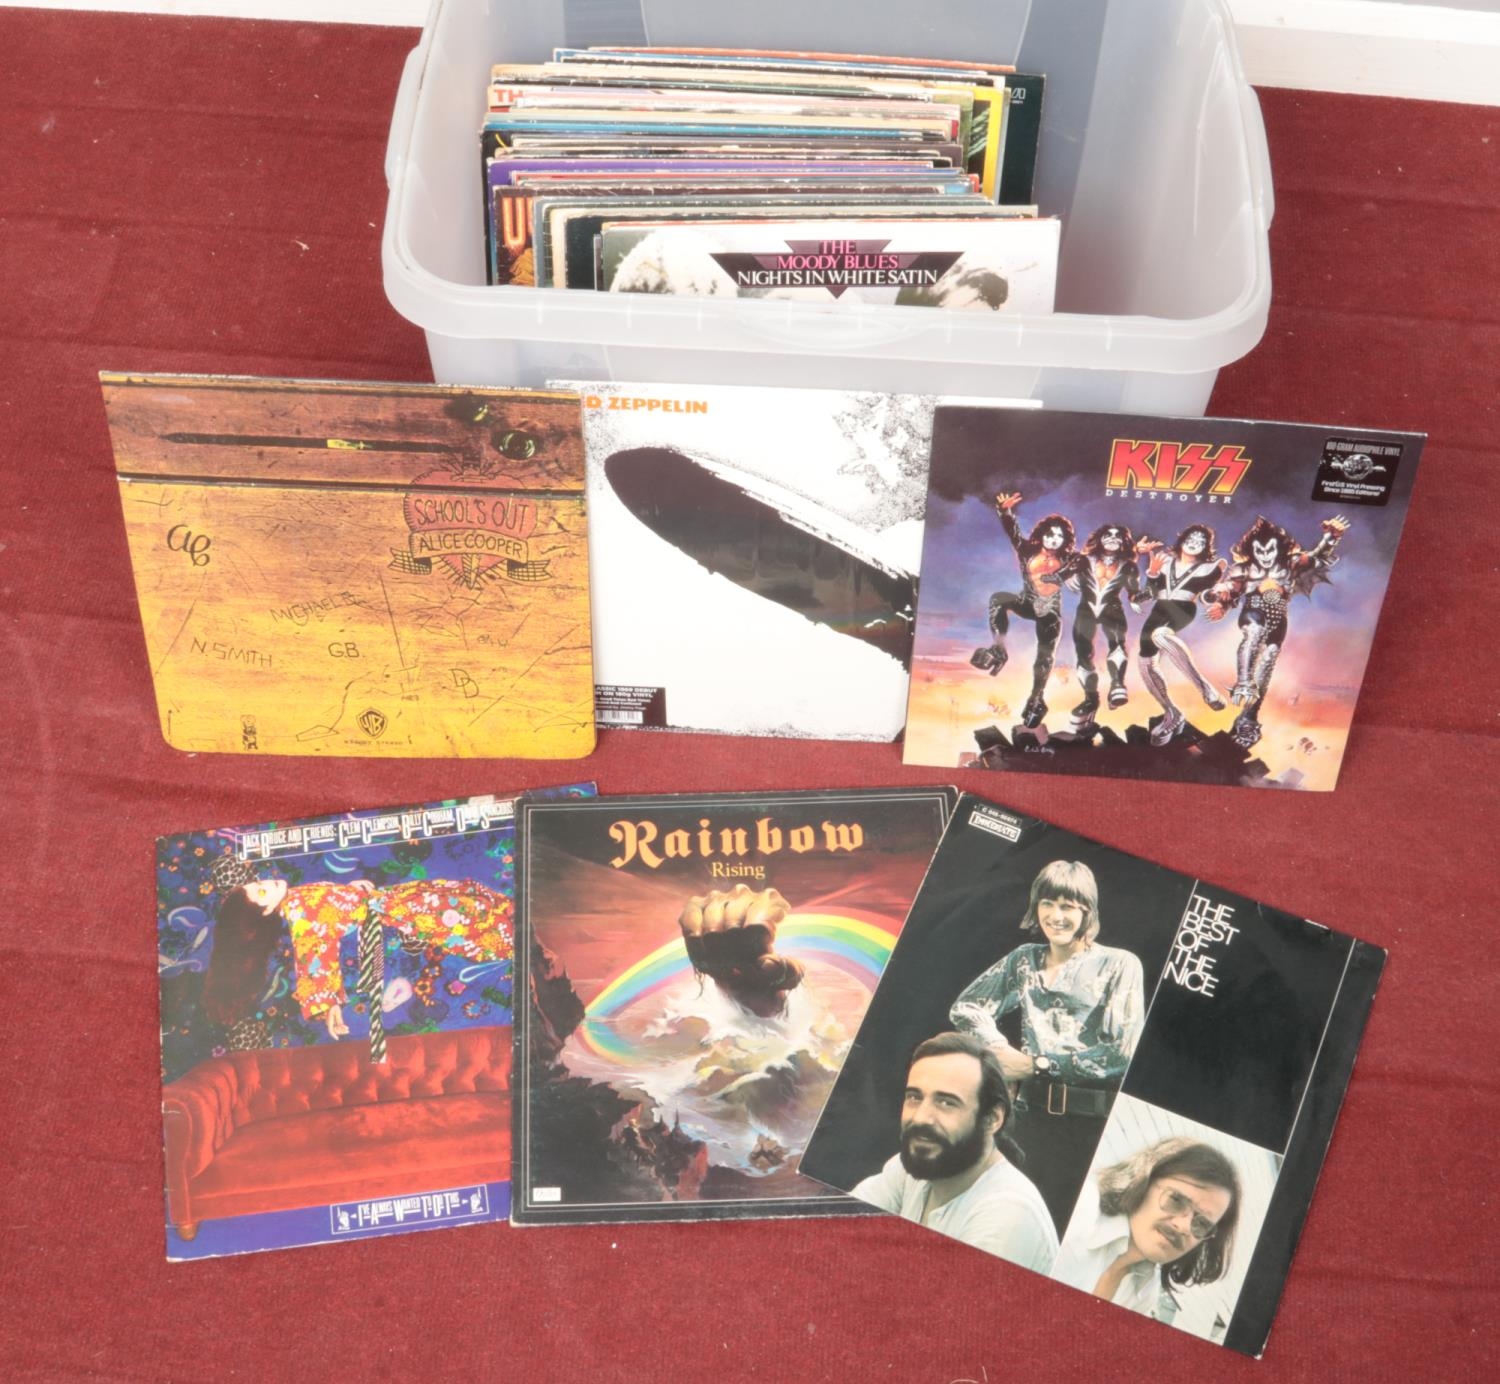 A box of LP records. Includes Led Zeppelin, Kiss, Alice Cooper, The Nice etc.